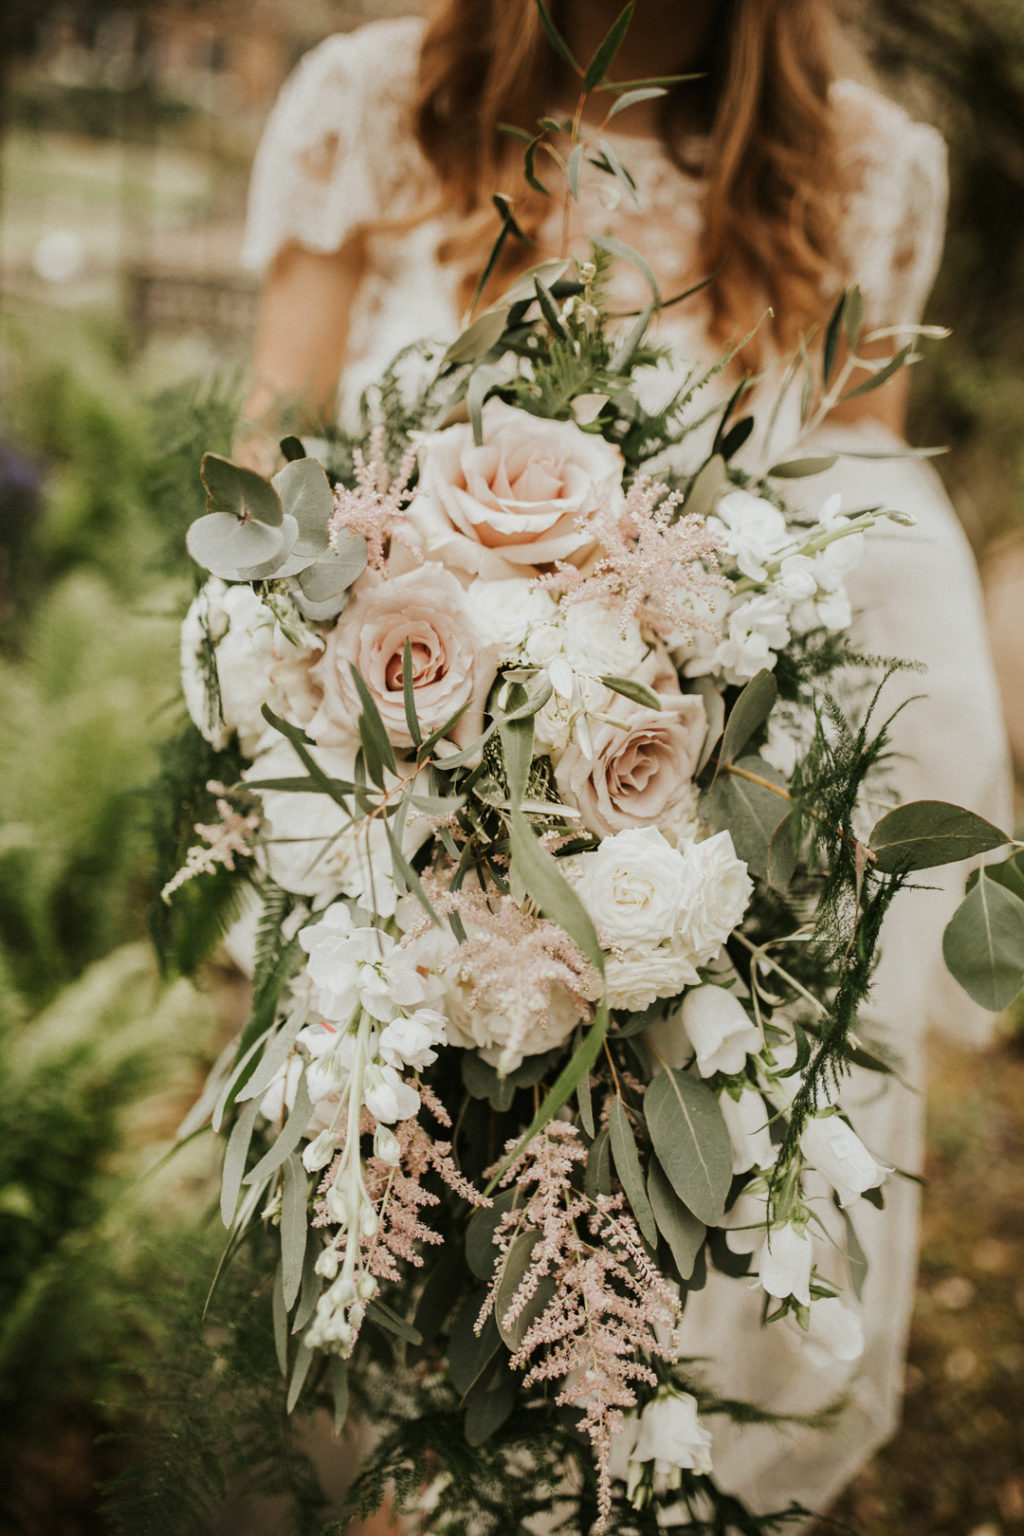 The wedding bouquet was lush and neutral, with blush and white blooms and cascading greenery